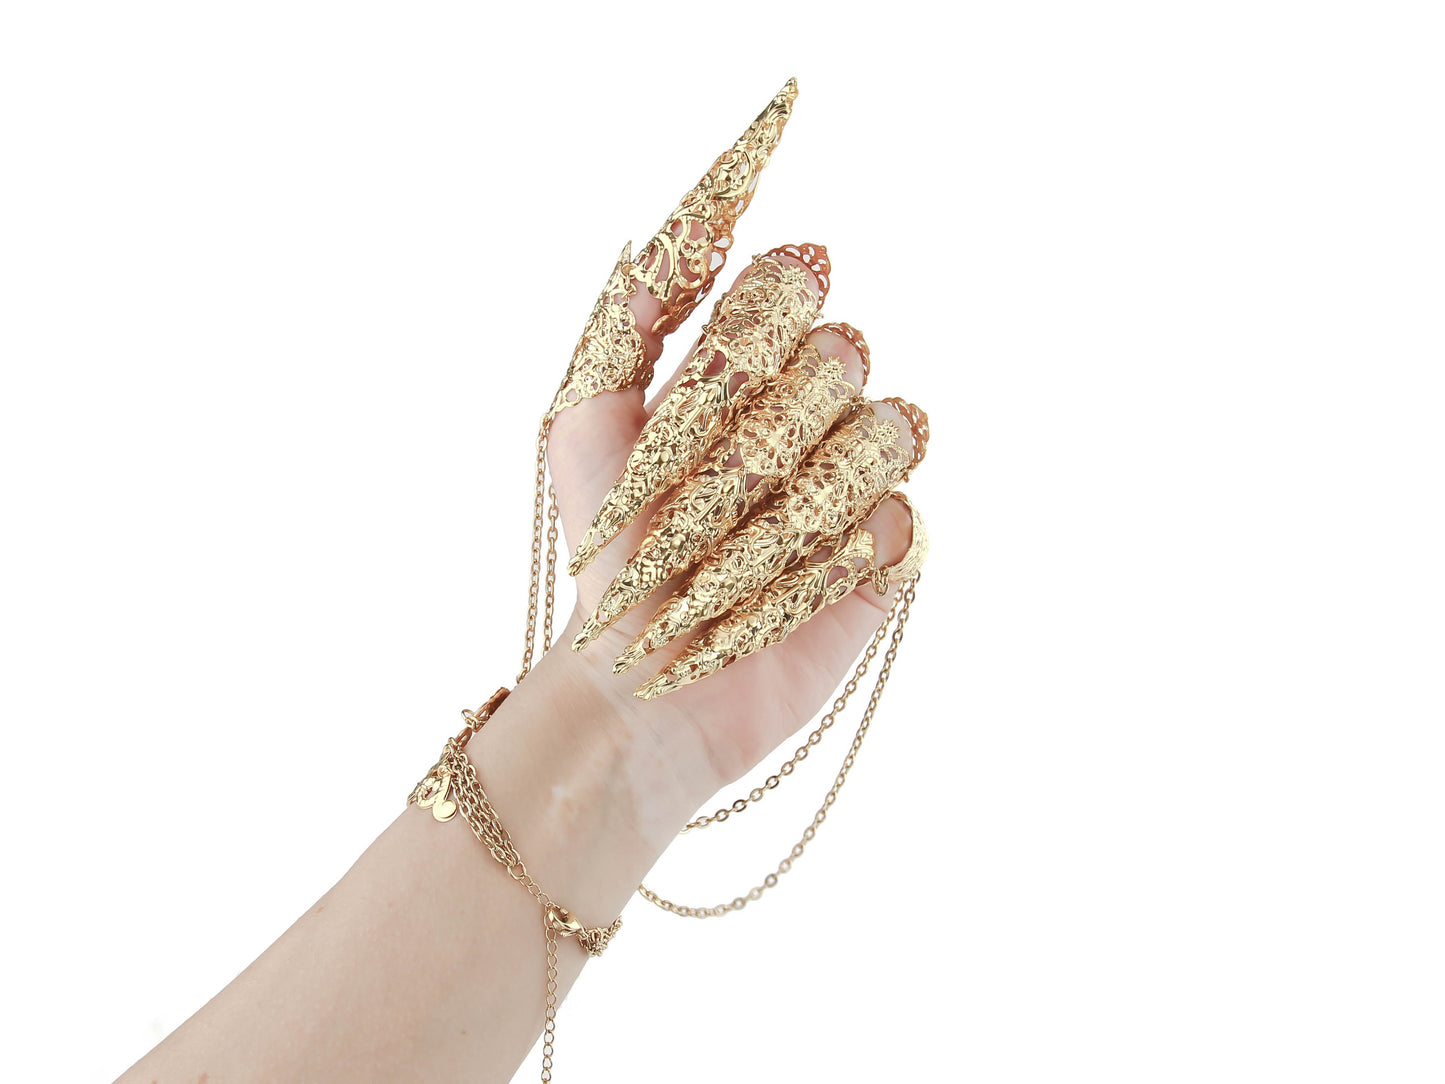 An exquisite gold metal glove with long full finger claw rings from Myril Jewels, perfect for a bold neo-goth statement. This avant-garde piece is an essential accessory for gothic, whimsigoth, and witchcore enthusiasts, and makes for an unforgettable gift for the goth girlfriend or a standout festival look.